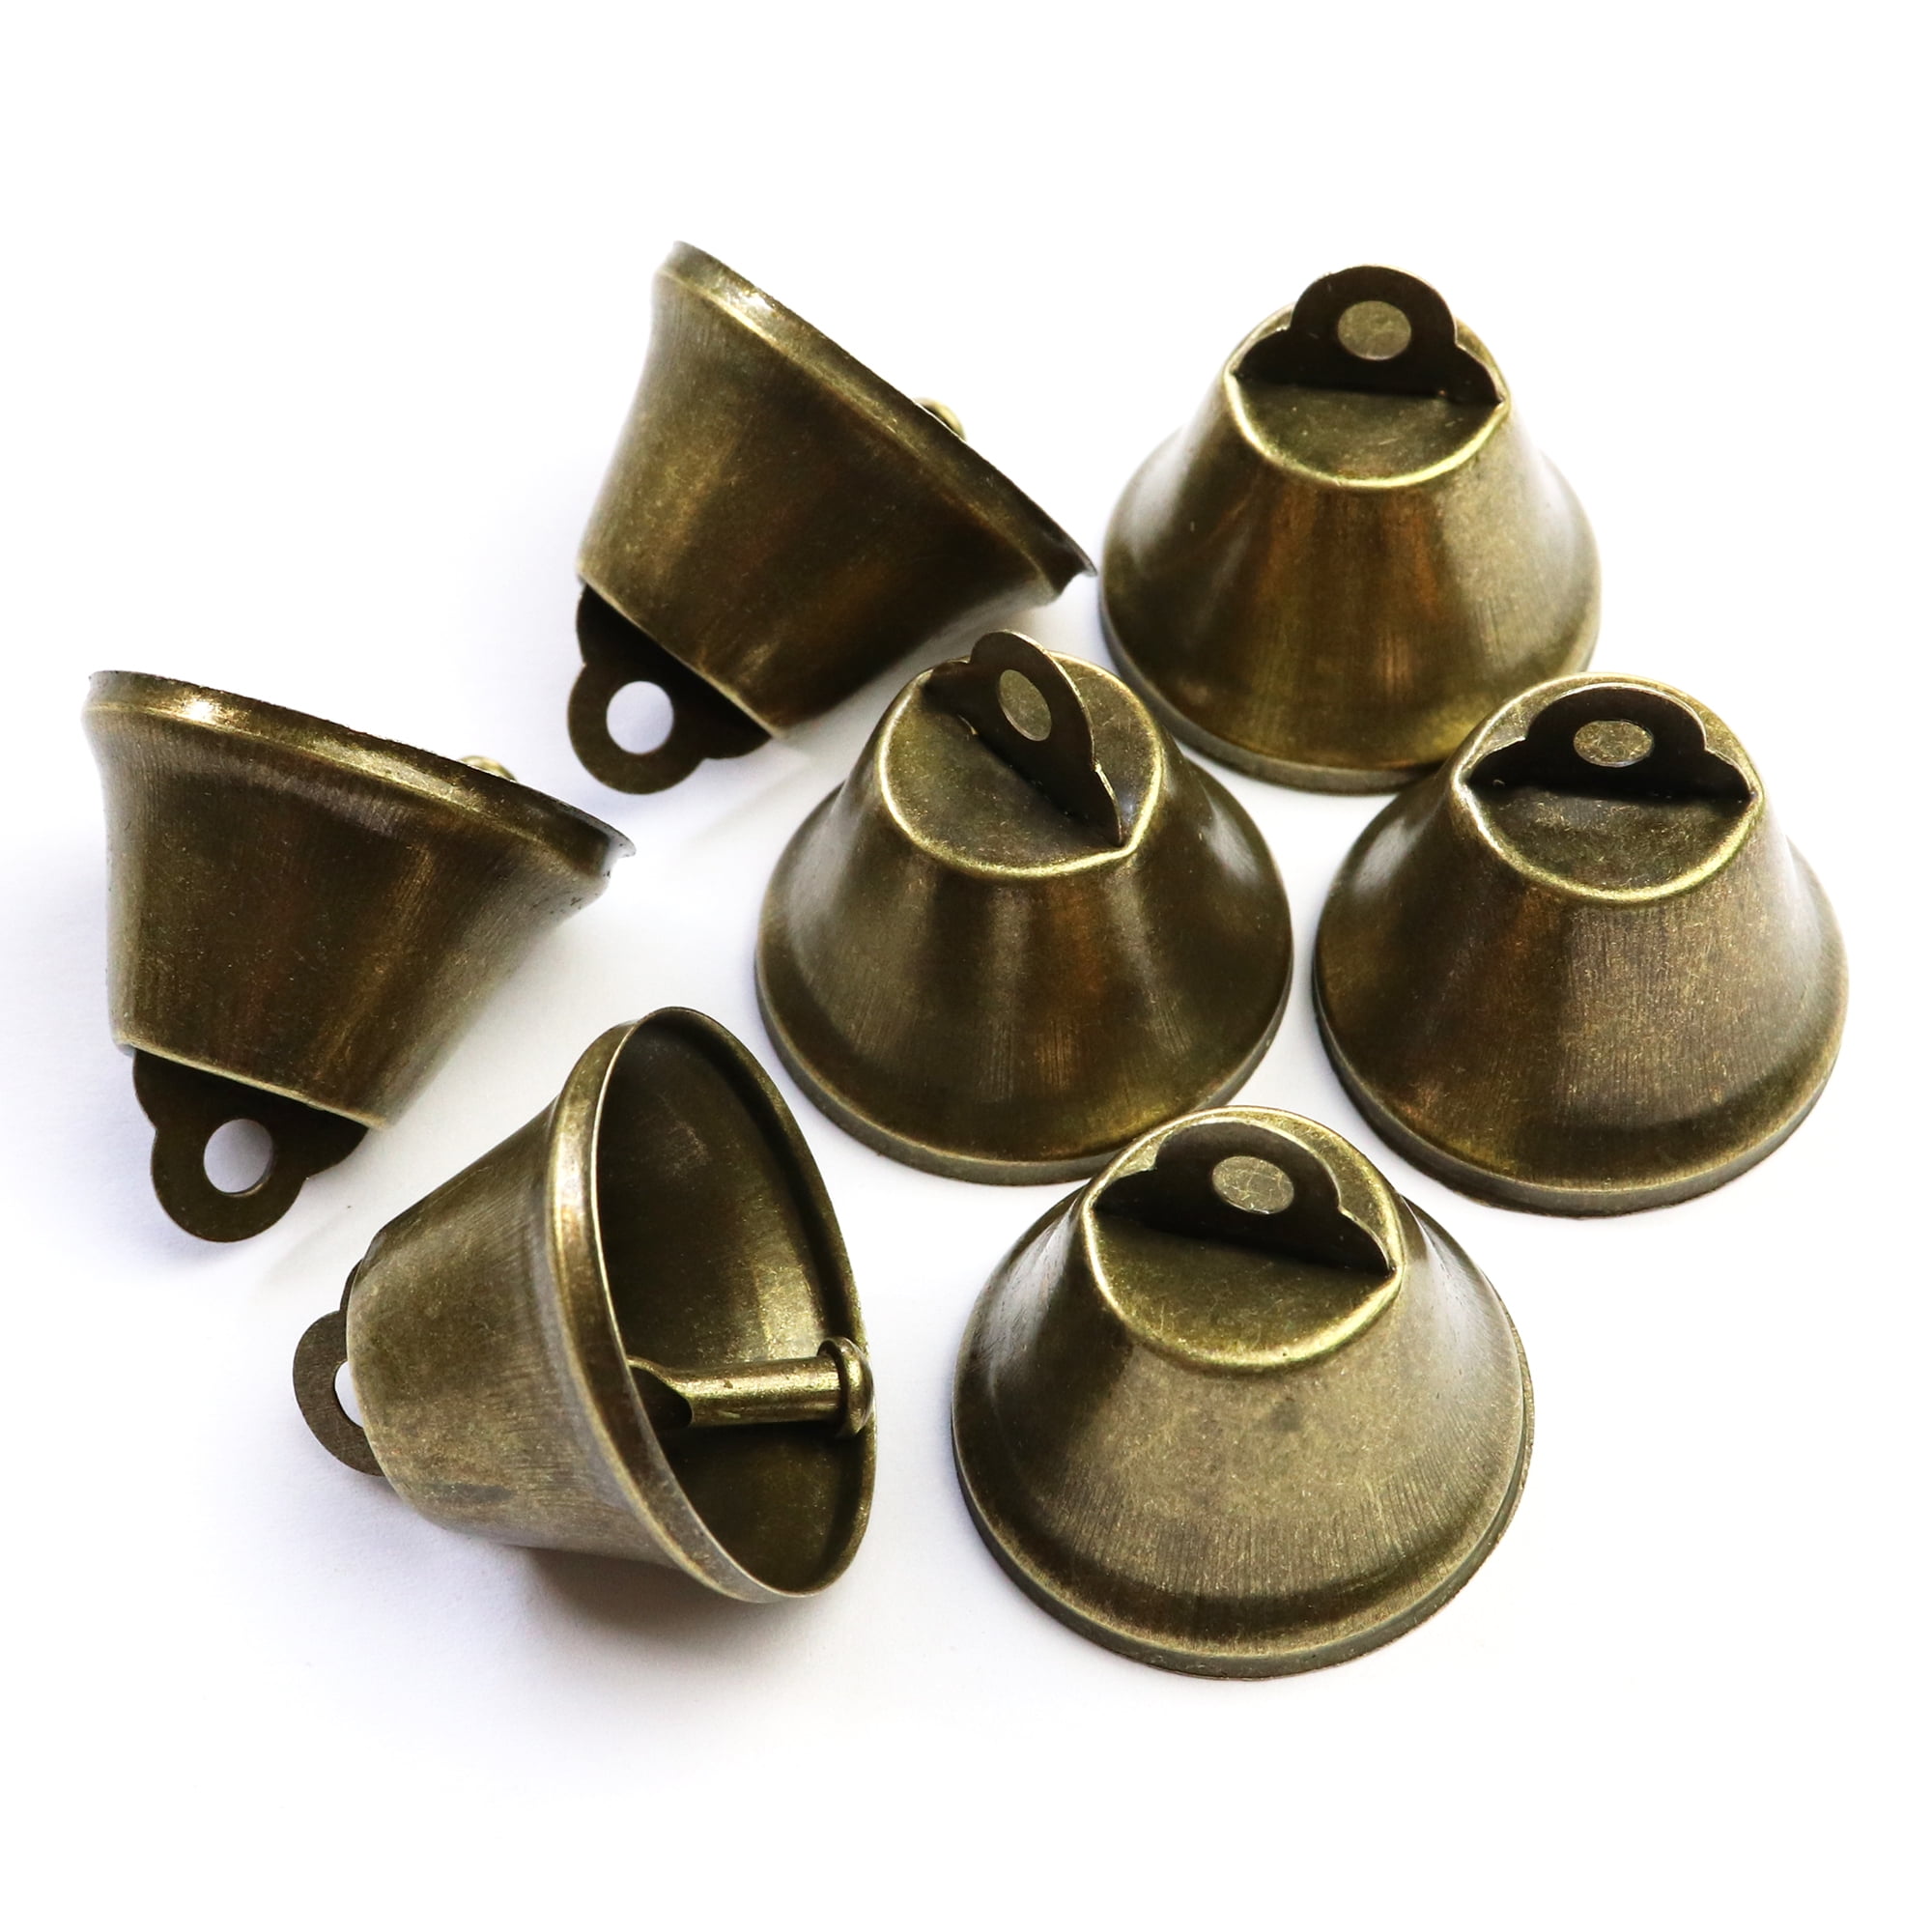  HOMSFOU 4pcs Brass Bell Vintage Bronze Jingle Bells Small Bells  for Crafting Brass Retro Bell Hand Jingle Bells Birthday Decoration for  Girl Brass Crafts Bell Little Bell Christmas : Home 